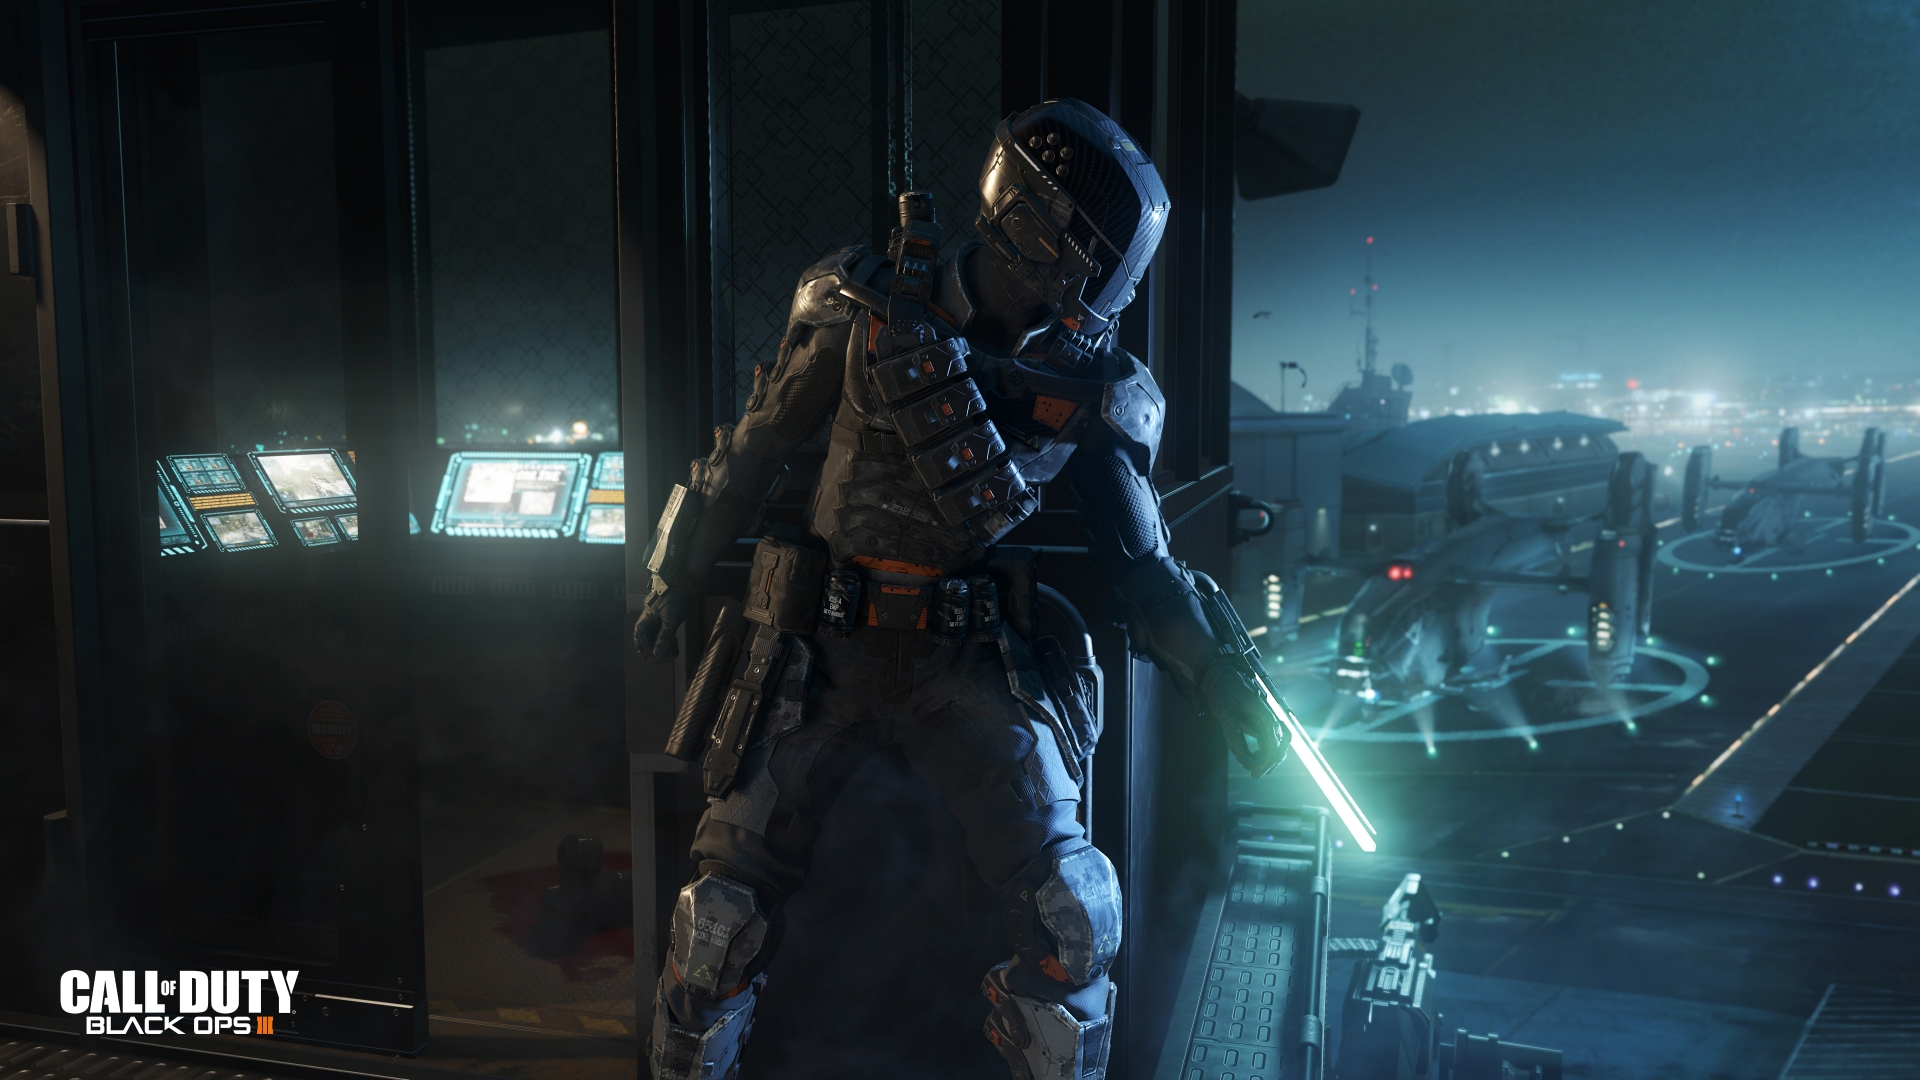 Call of Duty Black Ops 3 Specialist Spectre for 1920 x 1080 HDTV 1080p resolution